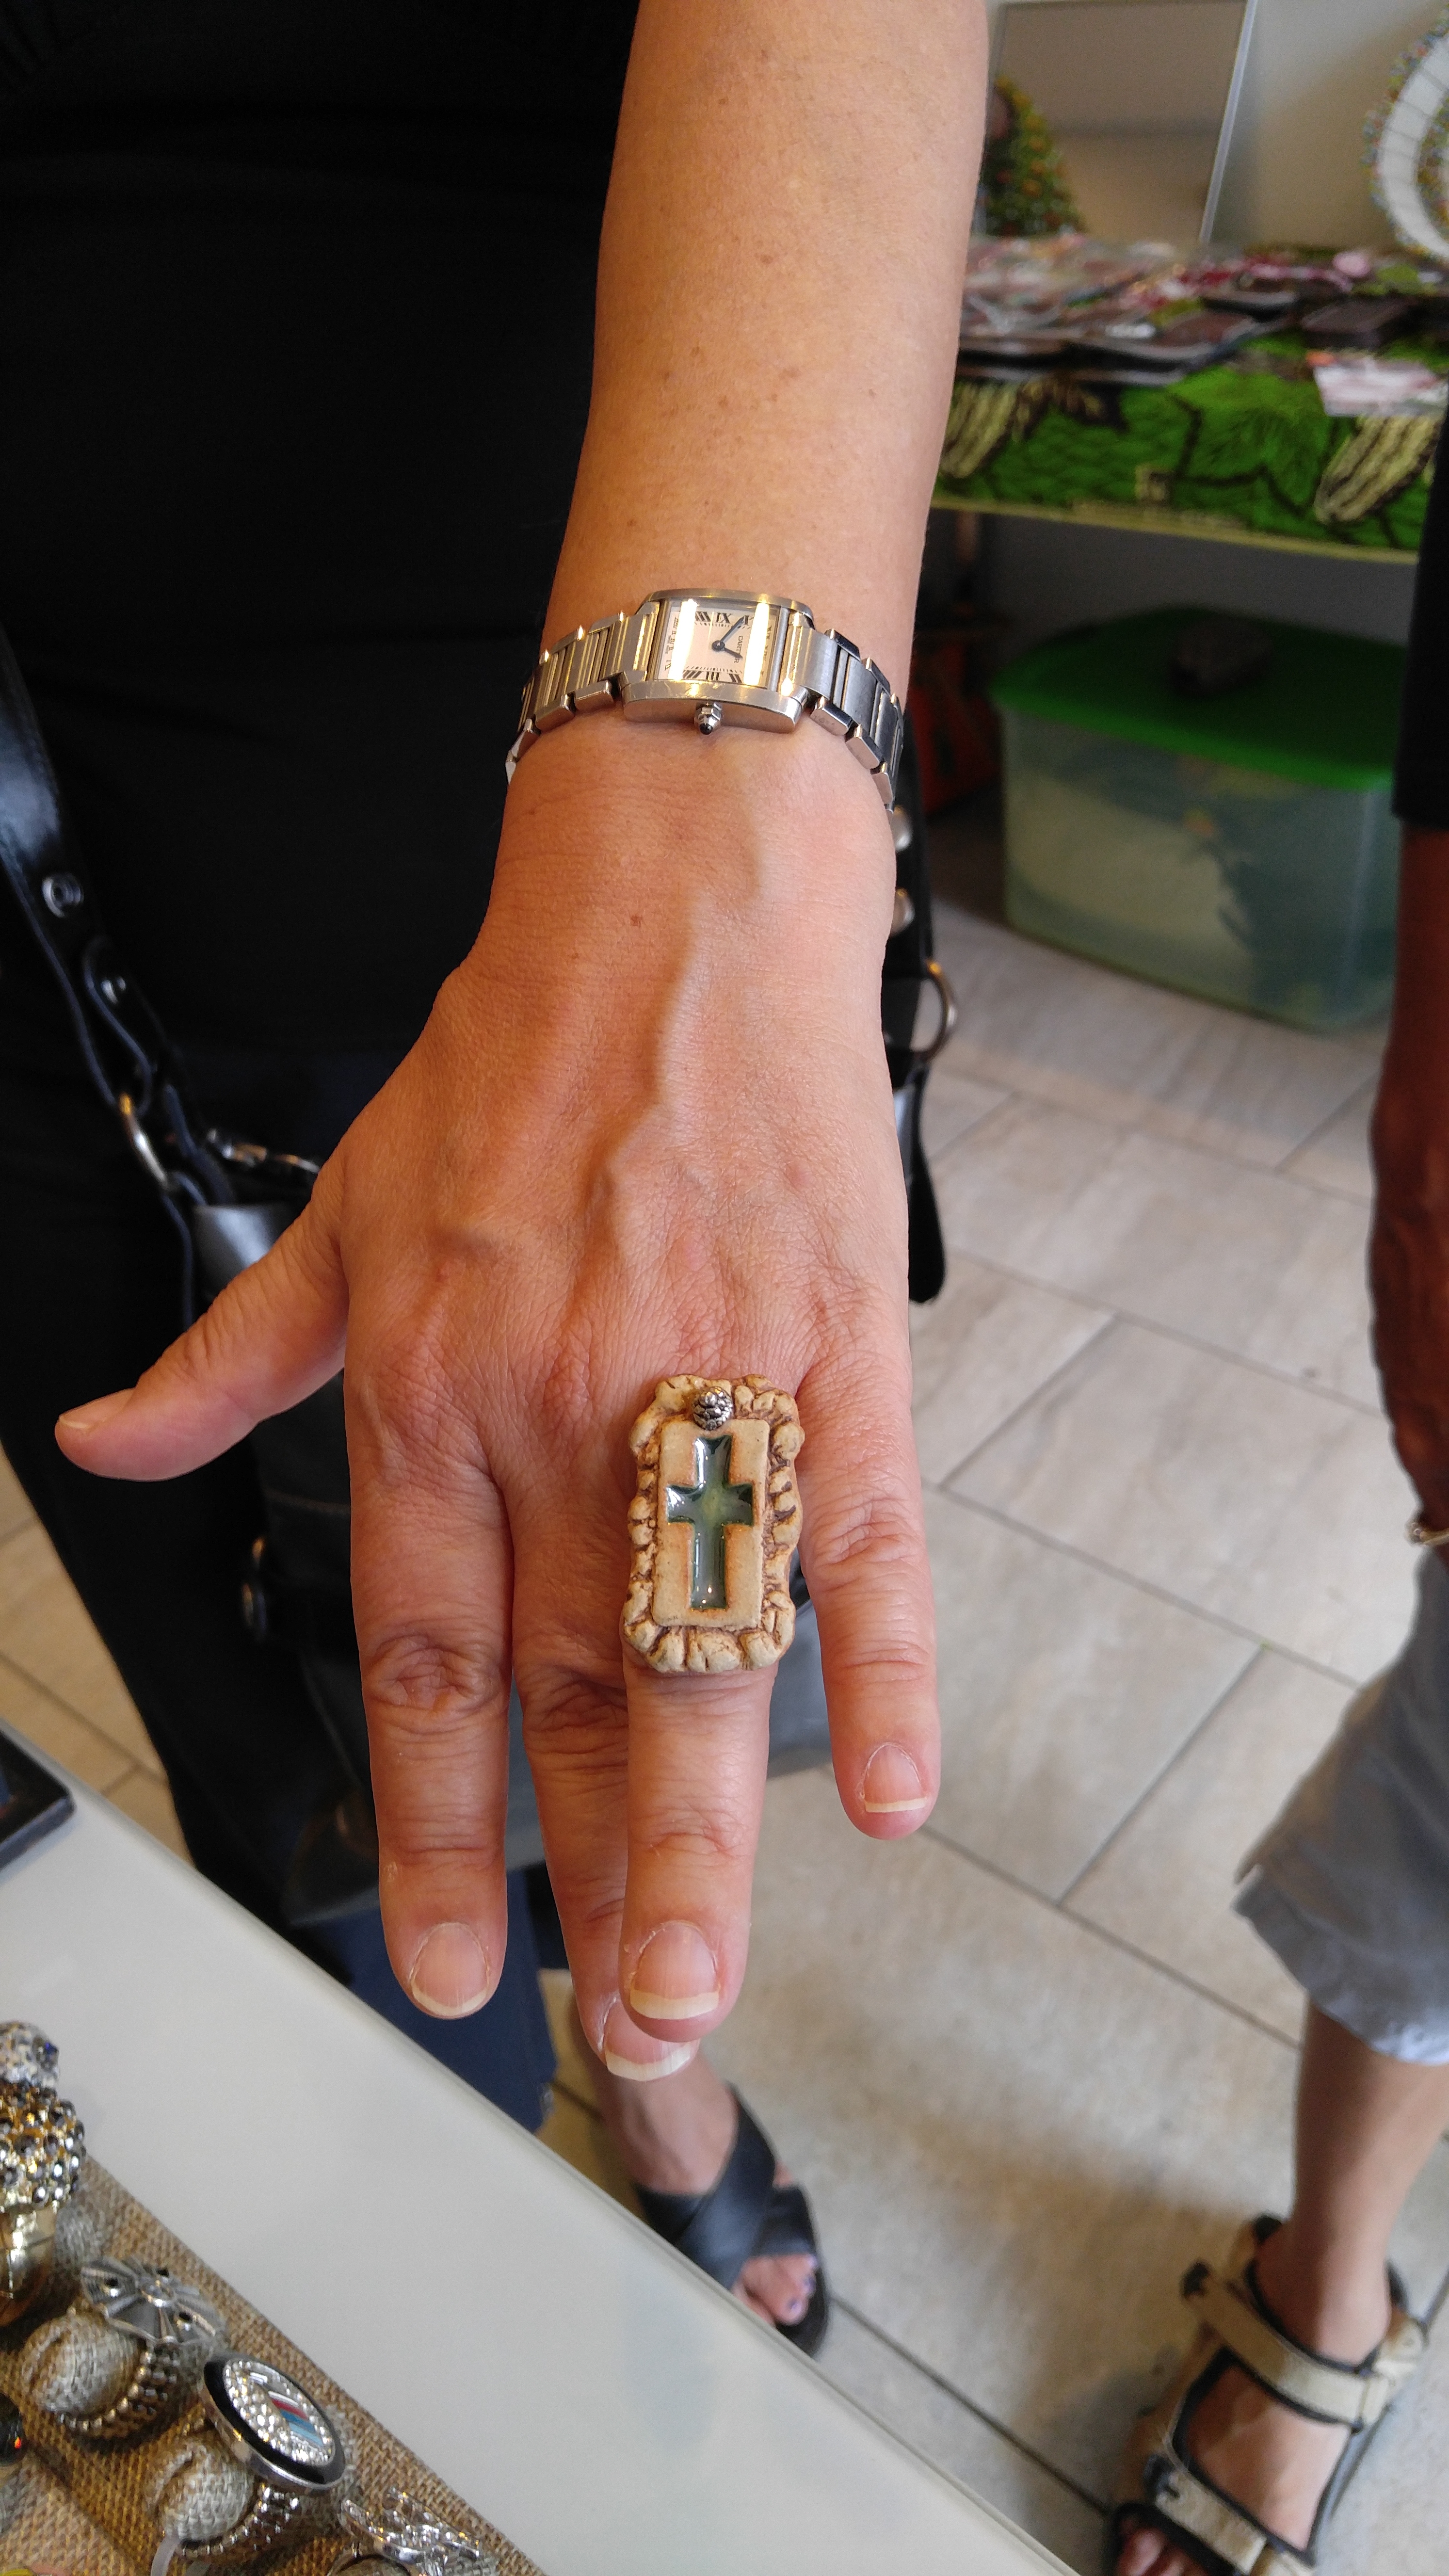 Customer wears ceramic ring with cross mold, Adams Morgans Day DC, Sept. 2016